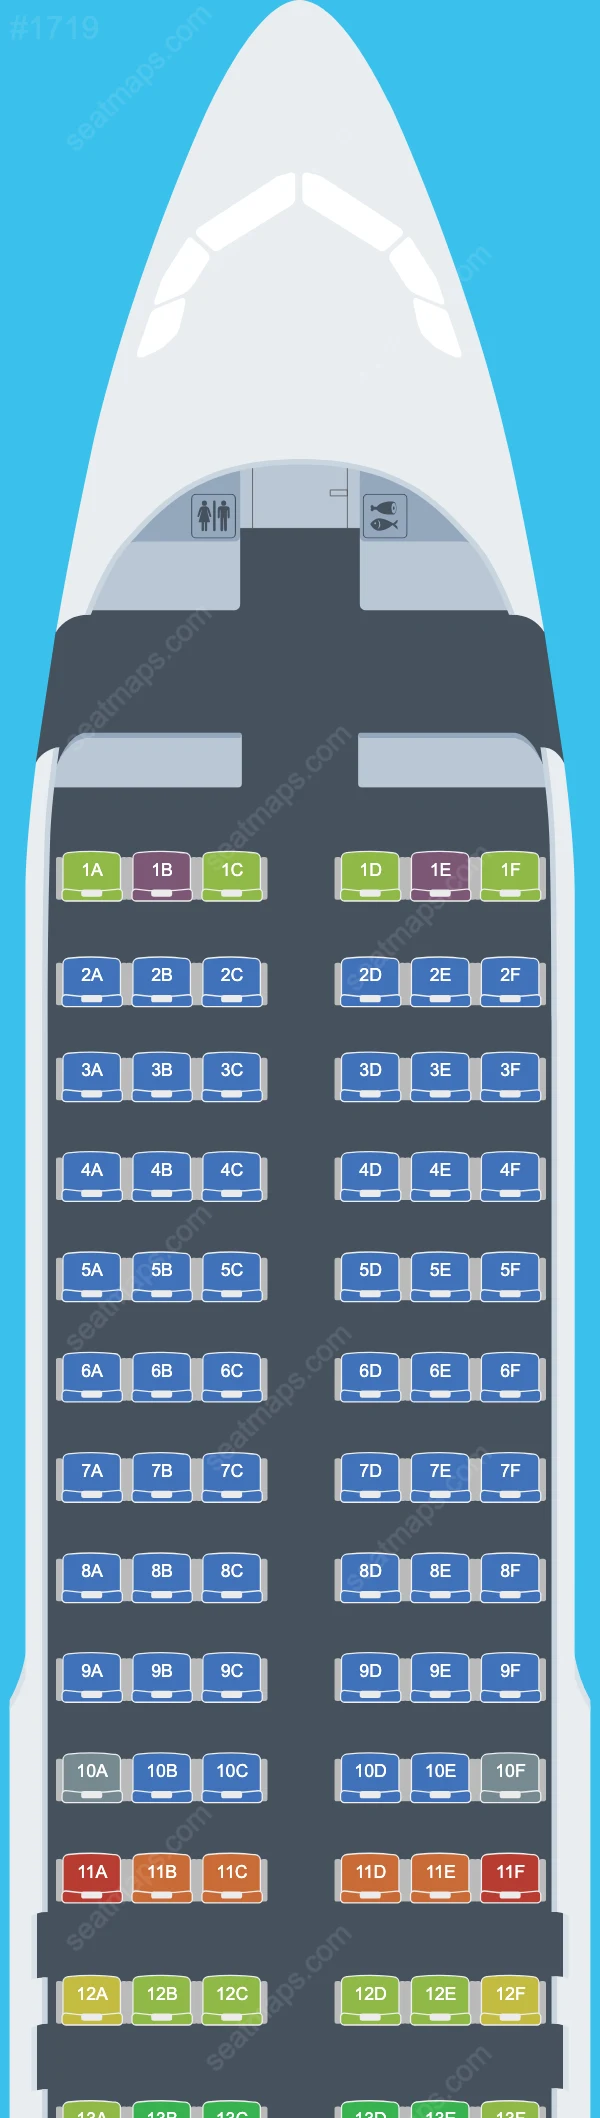 Aer Lingus Limited Airbus A320-200 seatmap preview